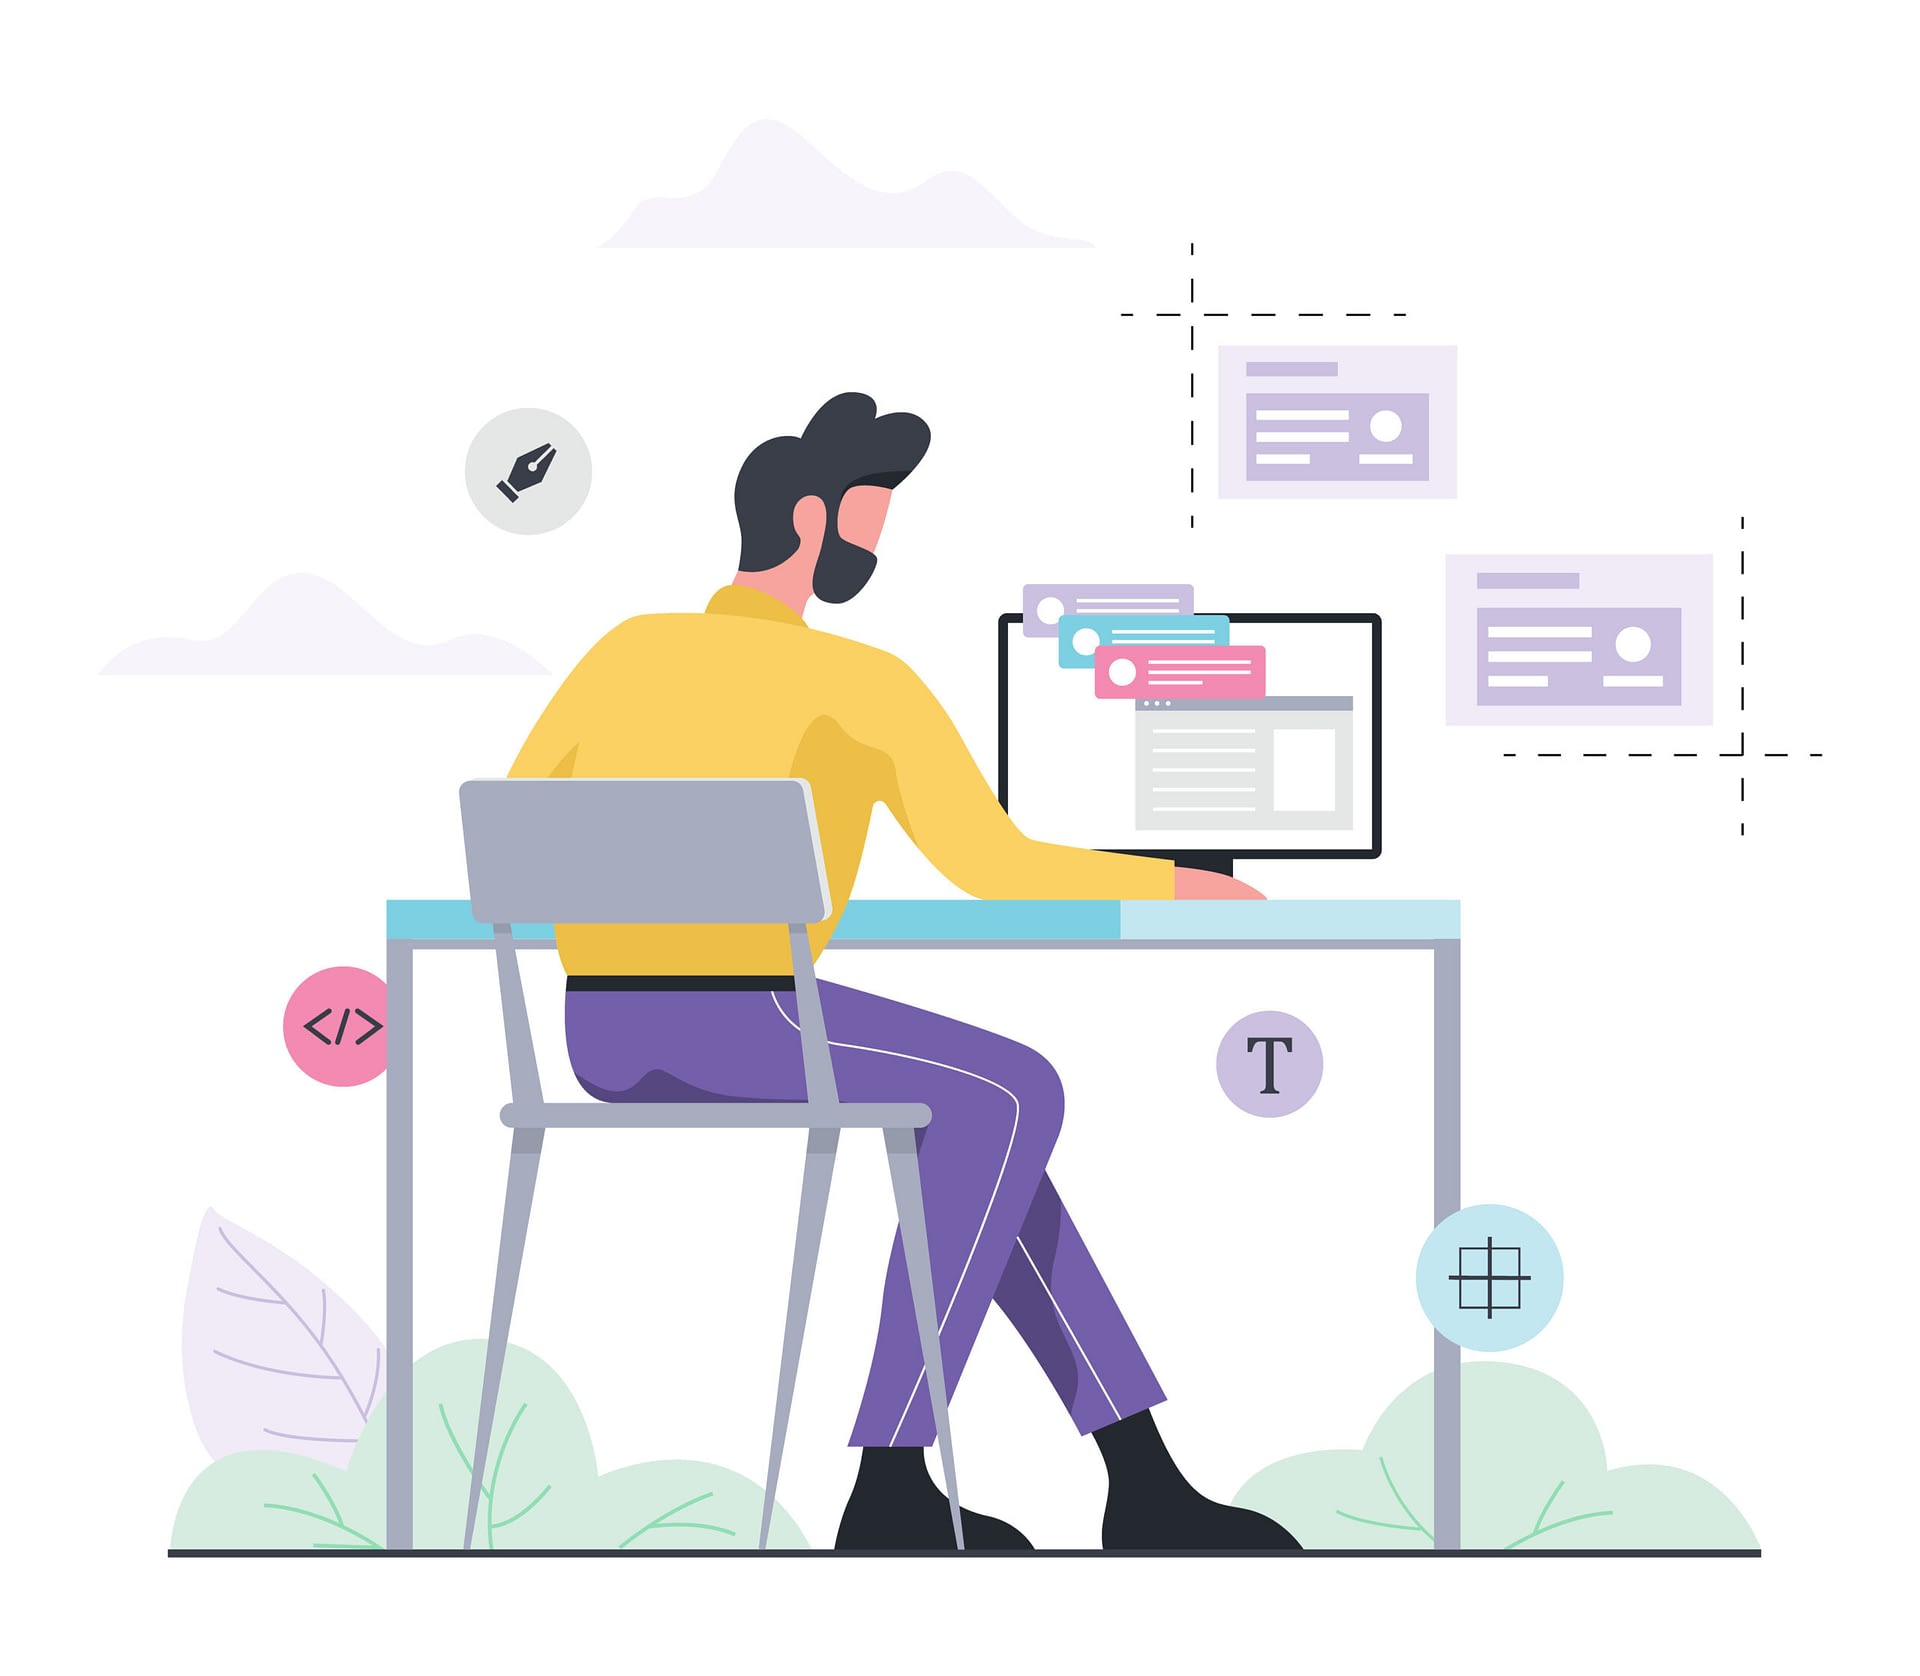 Web design and programming concept. Man sitting at the desk. Isolated flat illustration